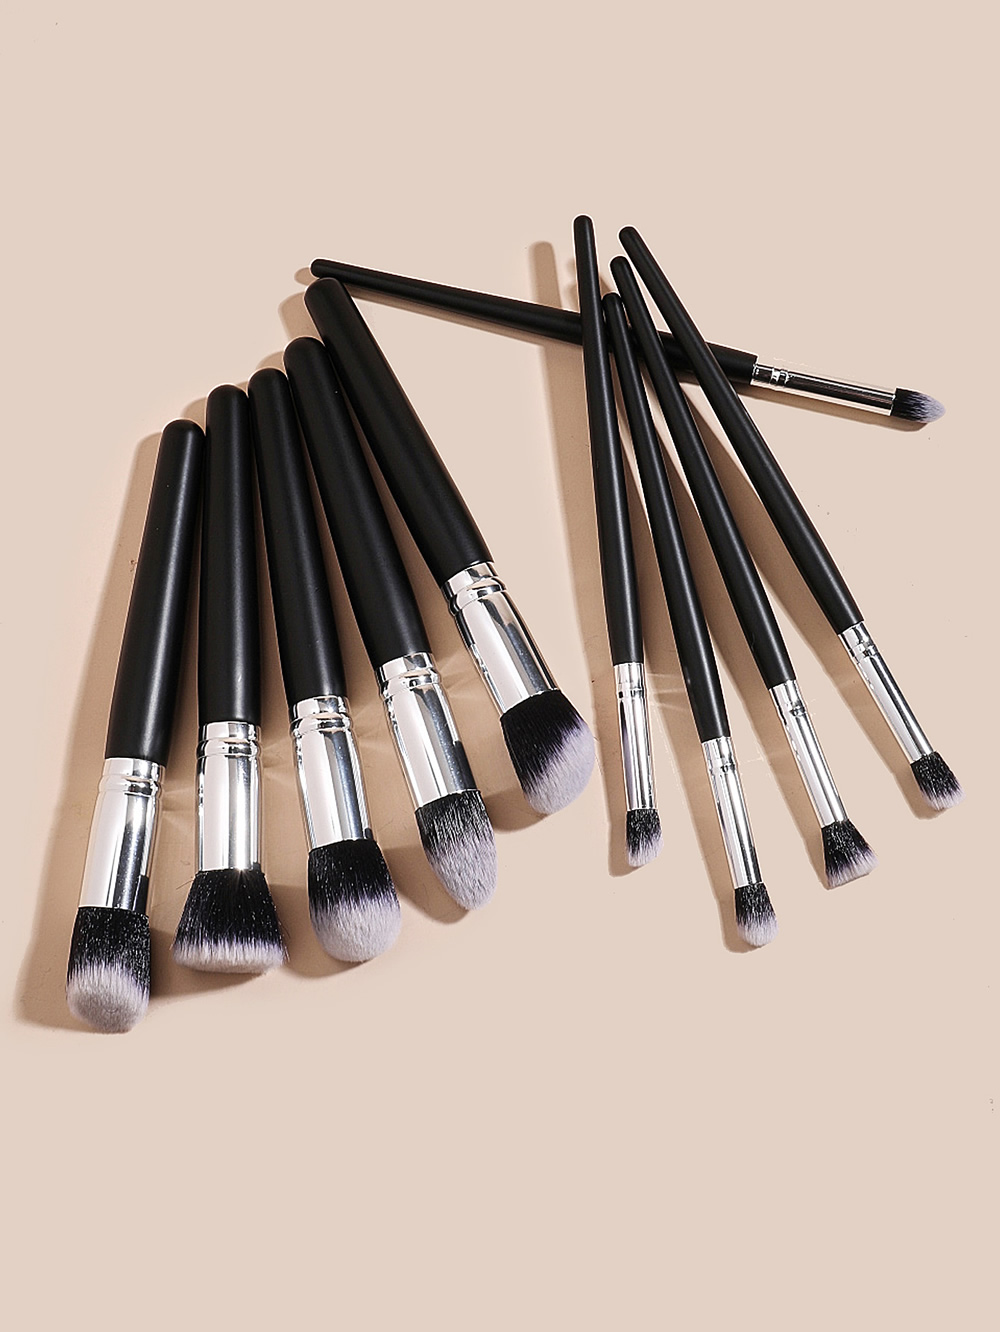 Fashion 10 Large Silver And Black 10pcs-large-silver Black-normal,Beauty tools